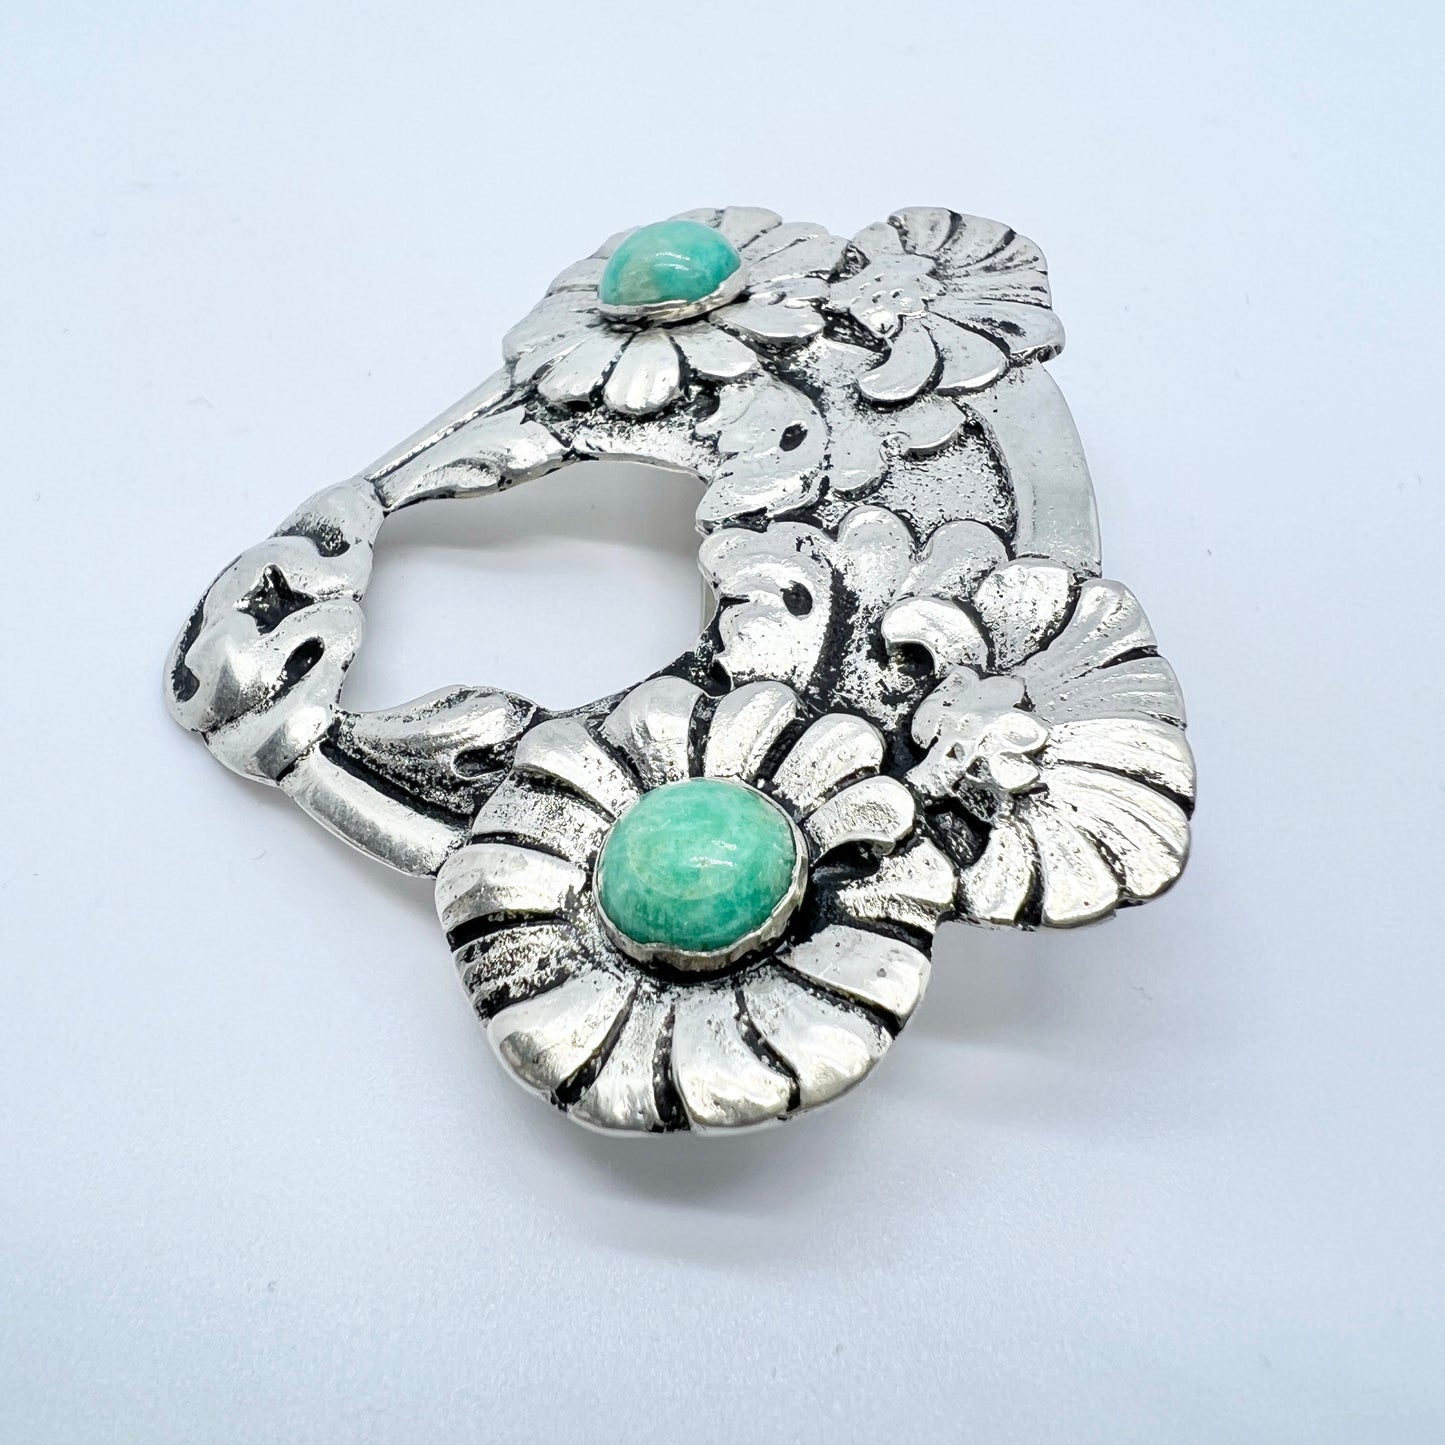 Antique early 1900s Art Nouveau Solid Silver Brooch.